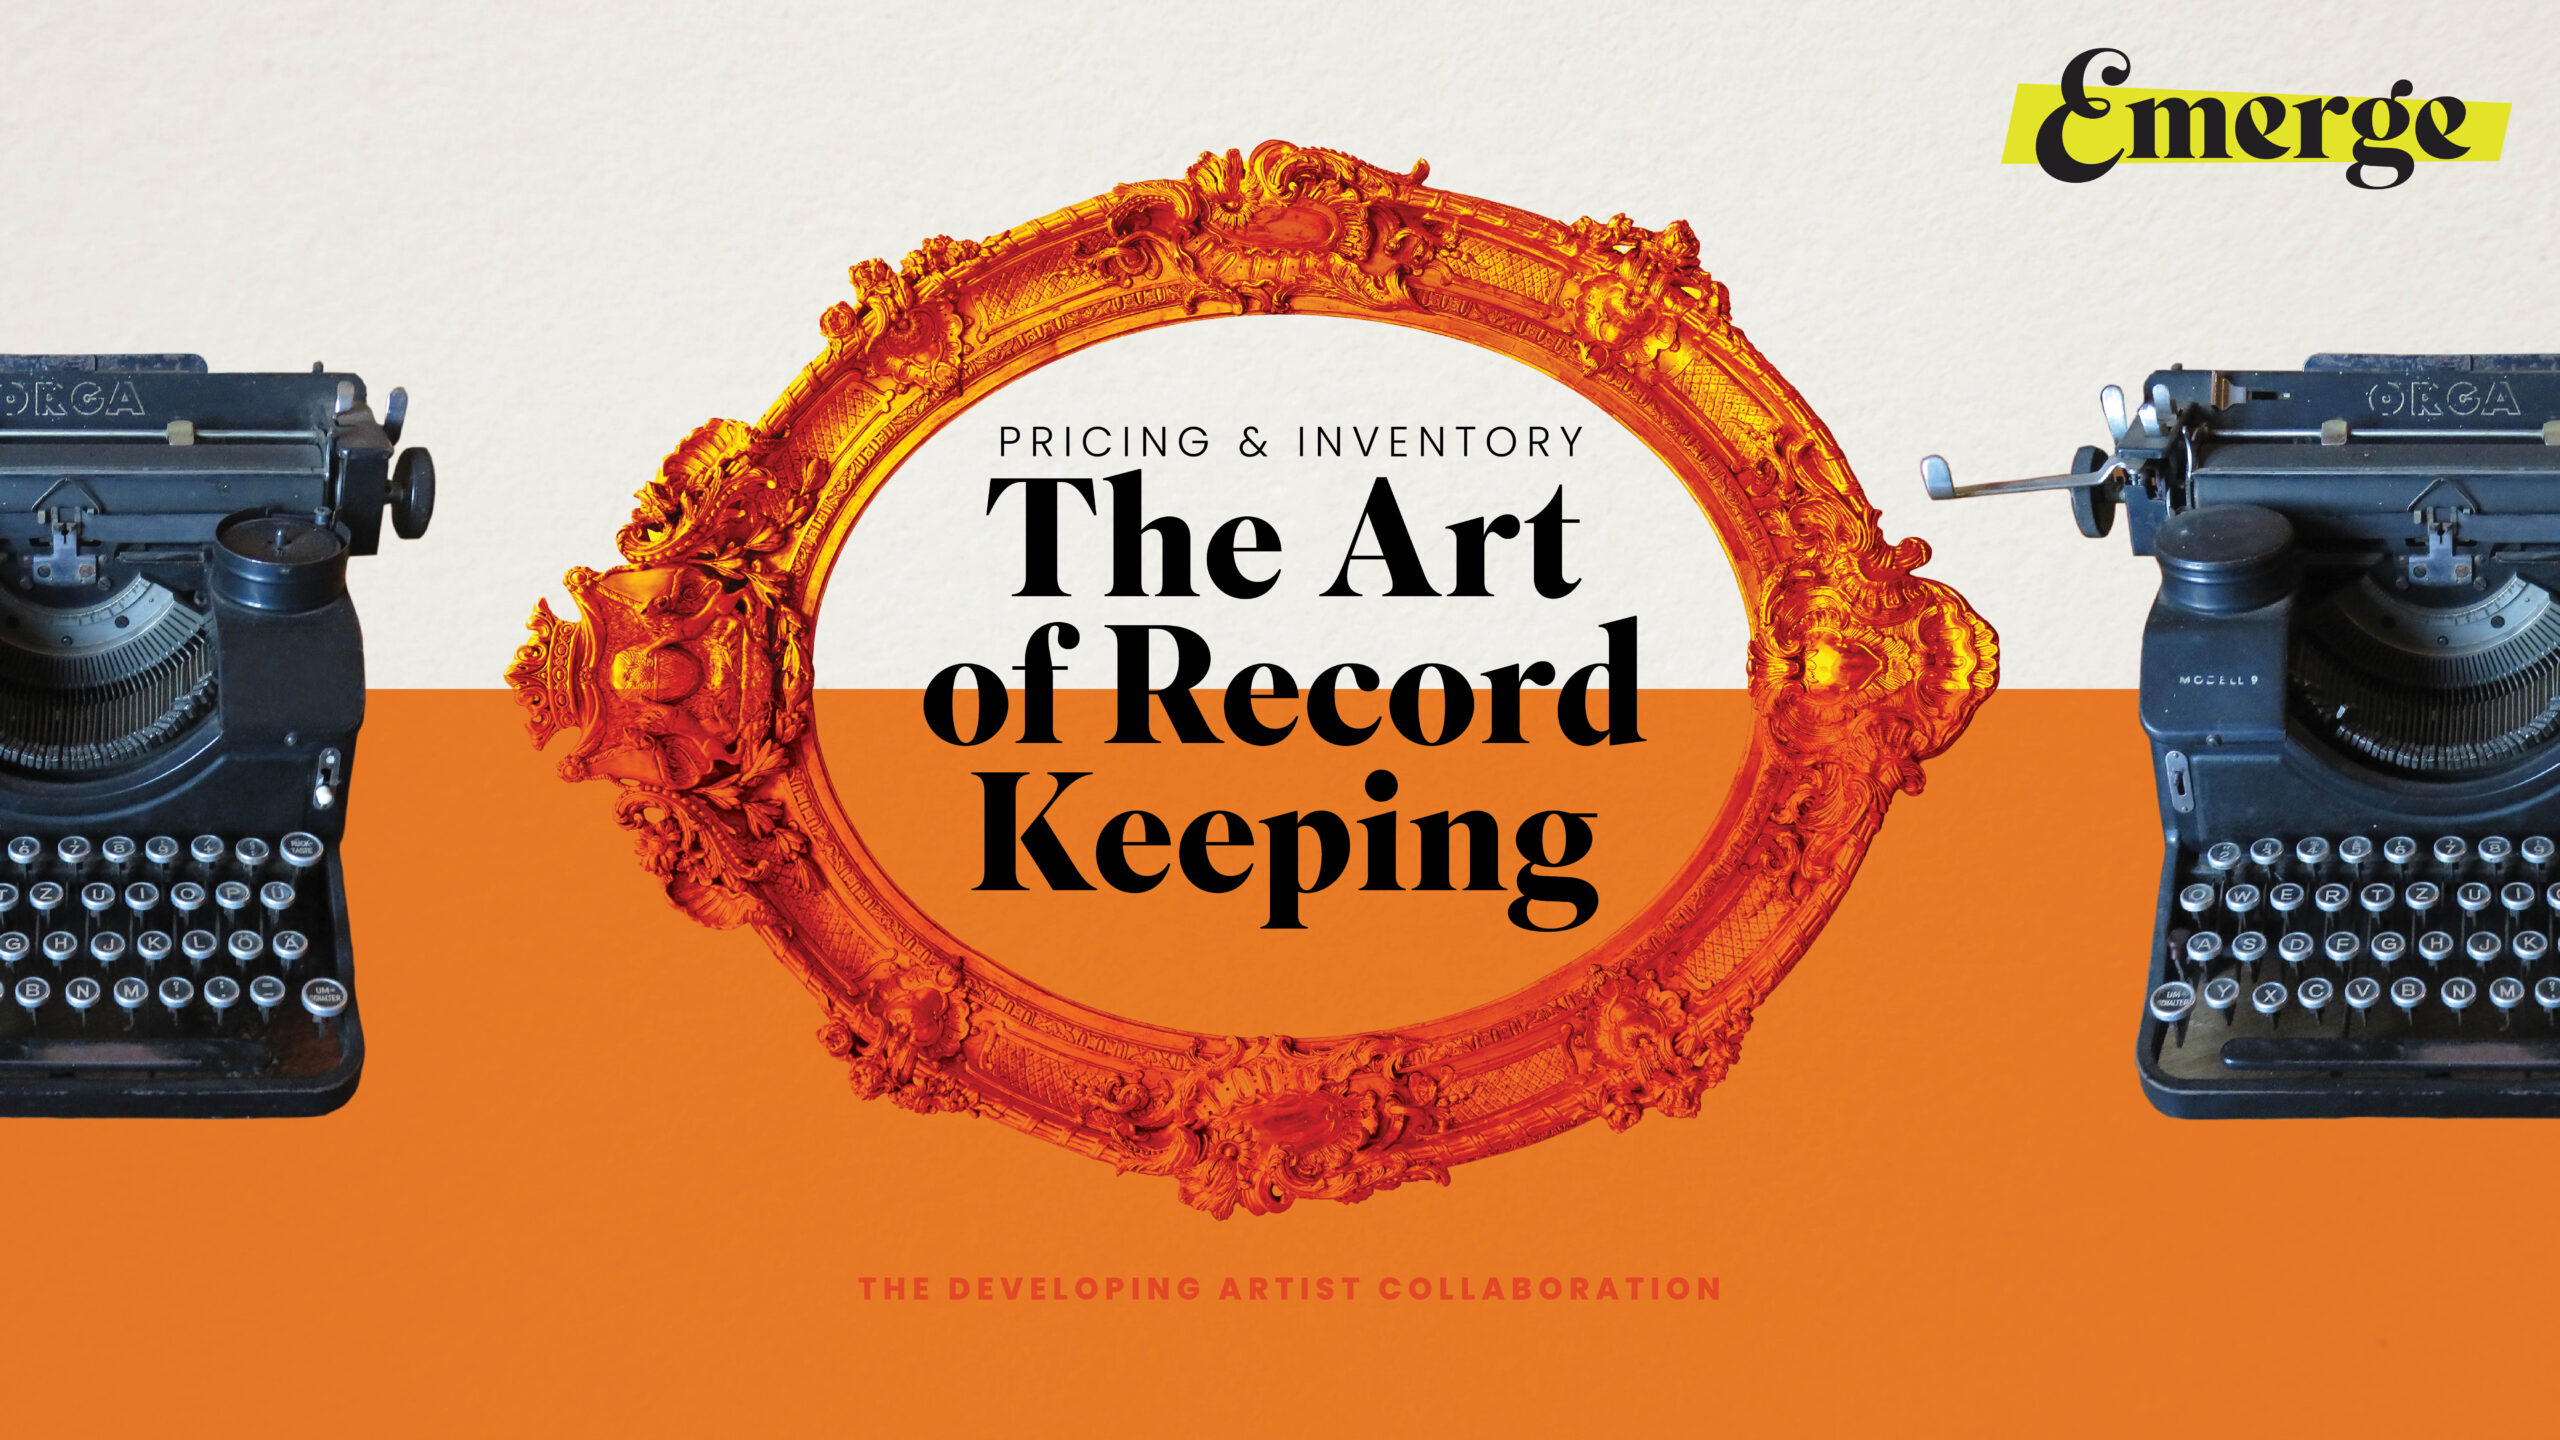 The Art of Record Keeping